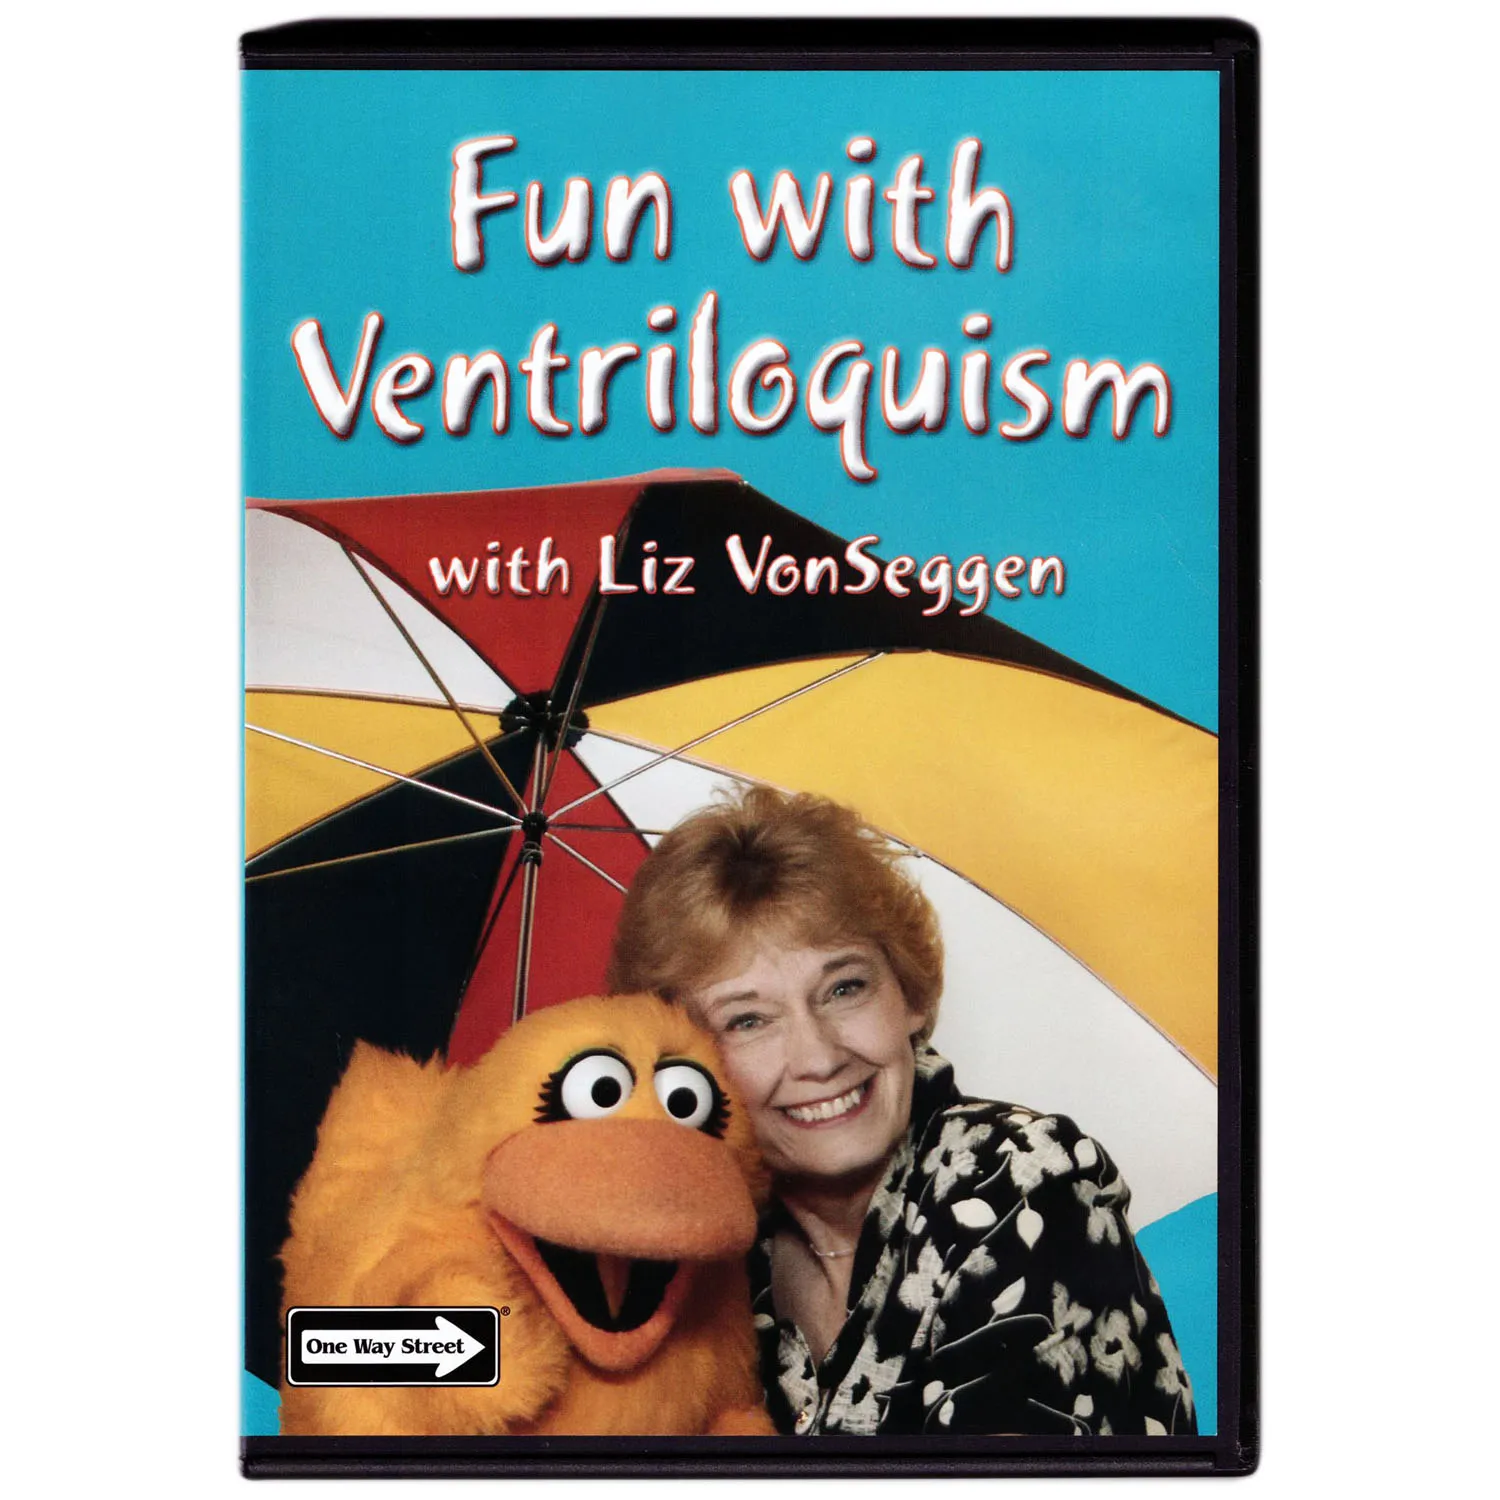 Fun with Ventriloquism Training DVD